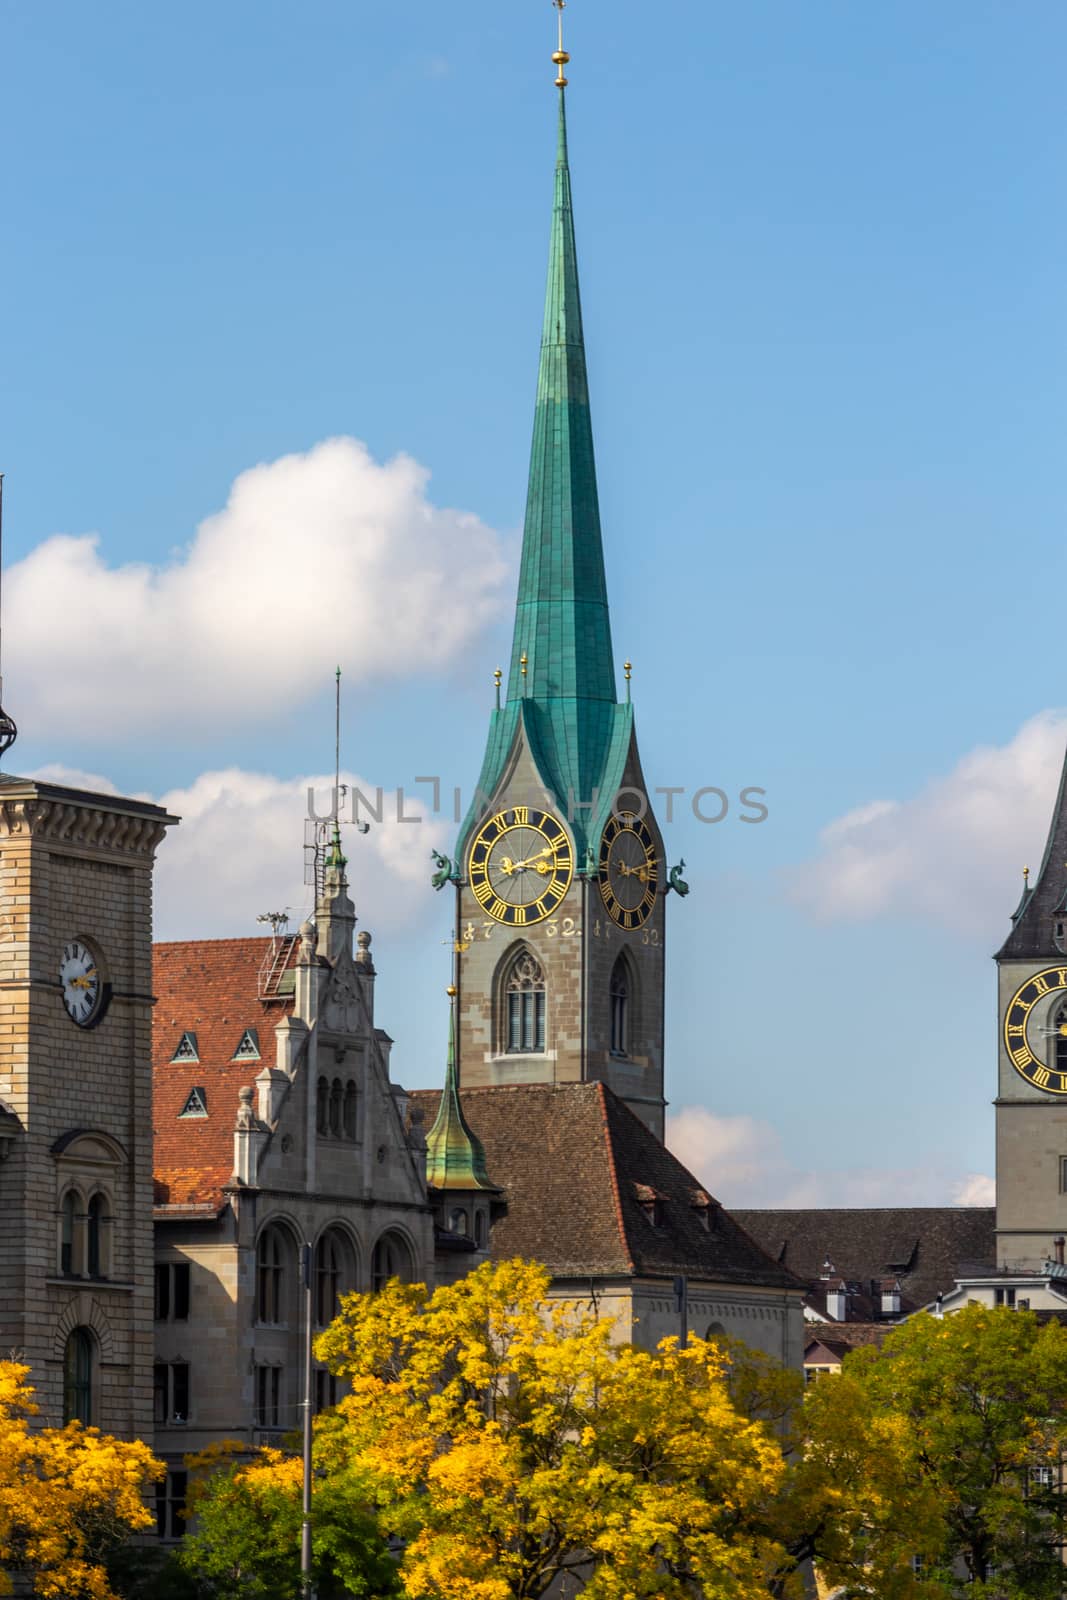 The tower of Fraumuenster church in Zurich, Switzerland in autumn, with multi colored trees in the foreground